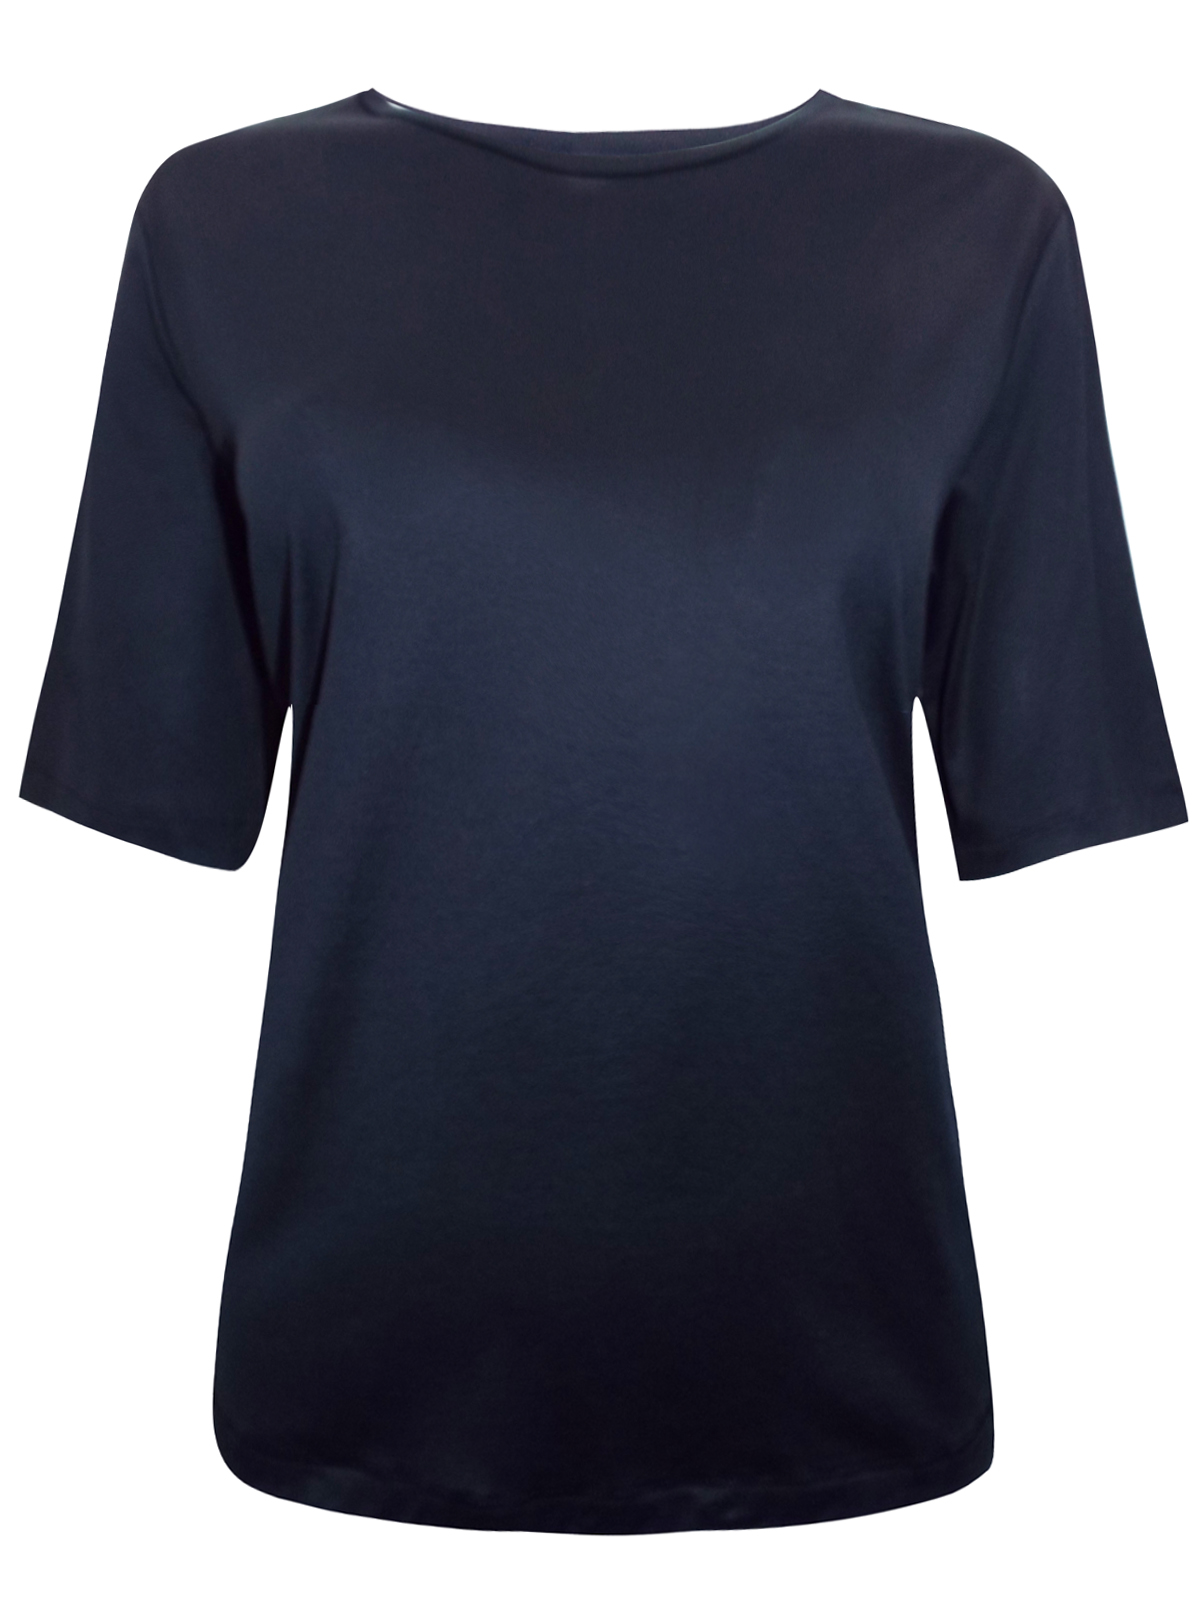 Marks and Spencer - - M&5 BLACK Half Sleeve T-Shirt - Size 6 to 22